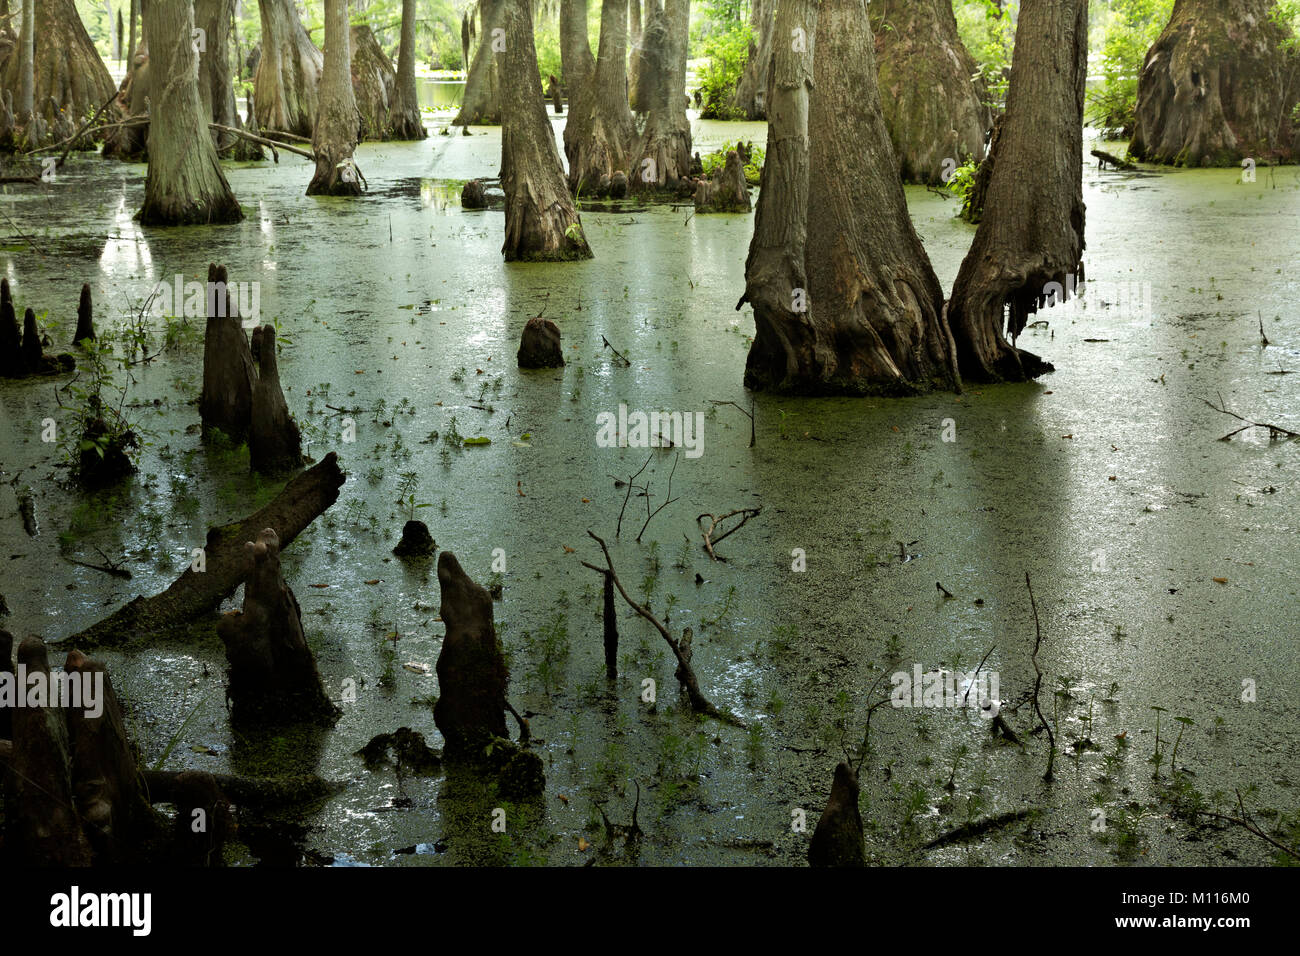 NC01445-00...NORTH CAROLINA - Cyress knees sticking through the duckweed  coating the still waters of Merchant Millpond in Merchant Millpond State Par Stock Photo